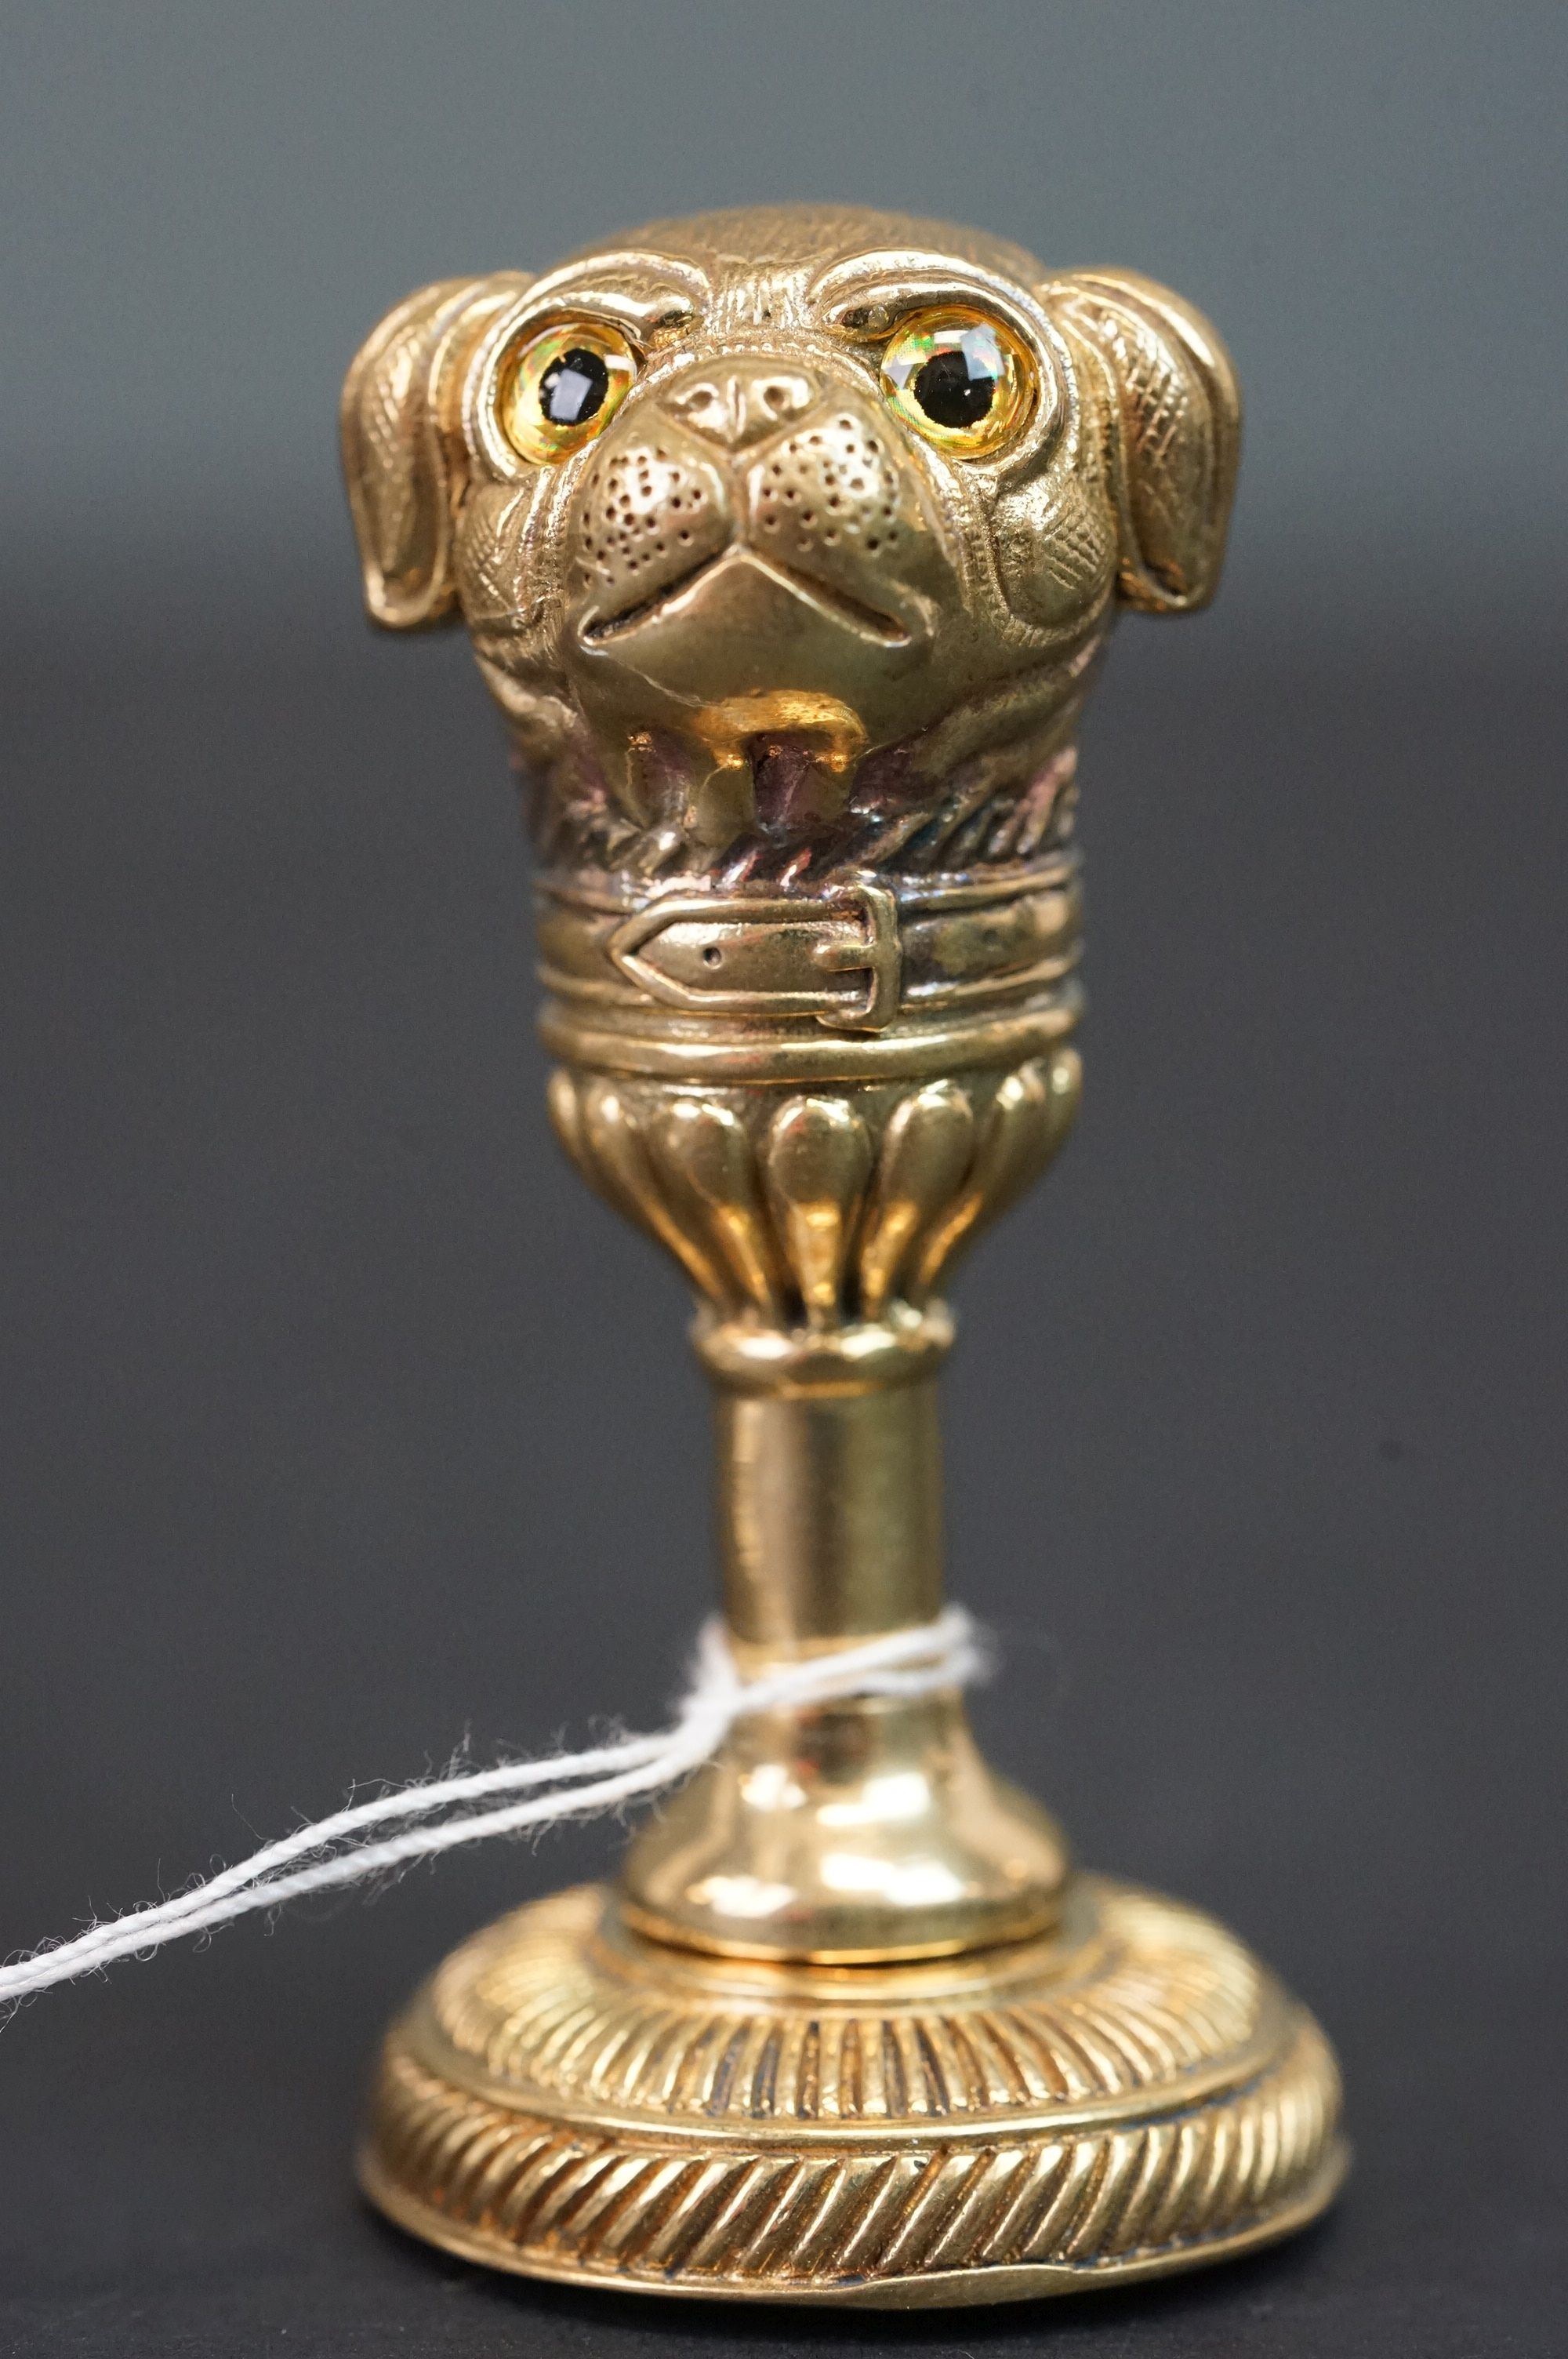 Novelty document seal in the form of a pug dog